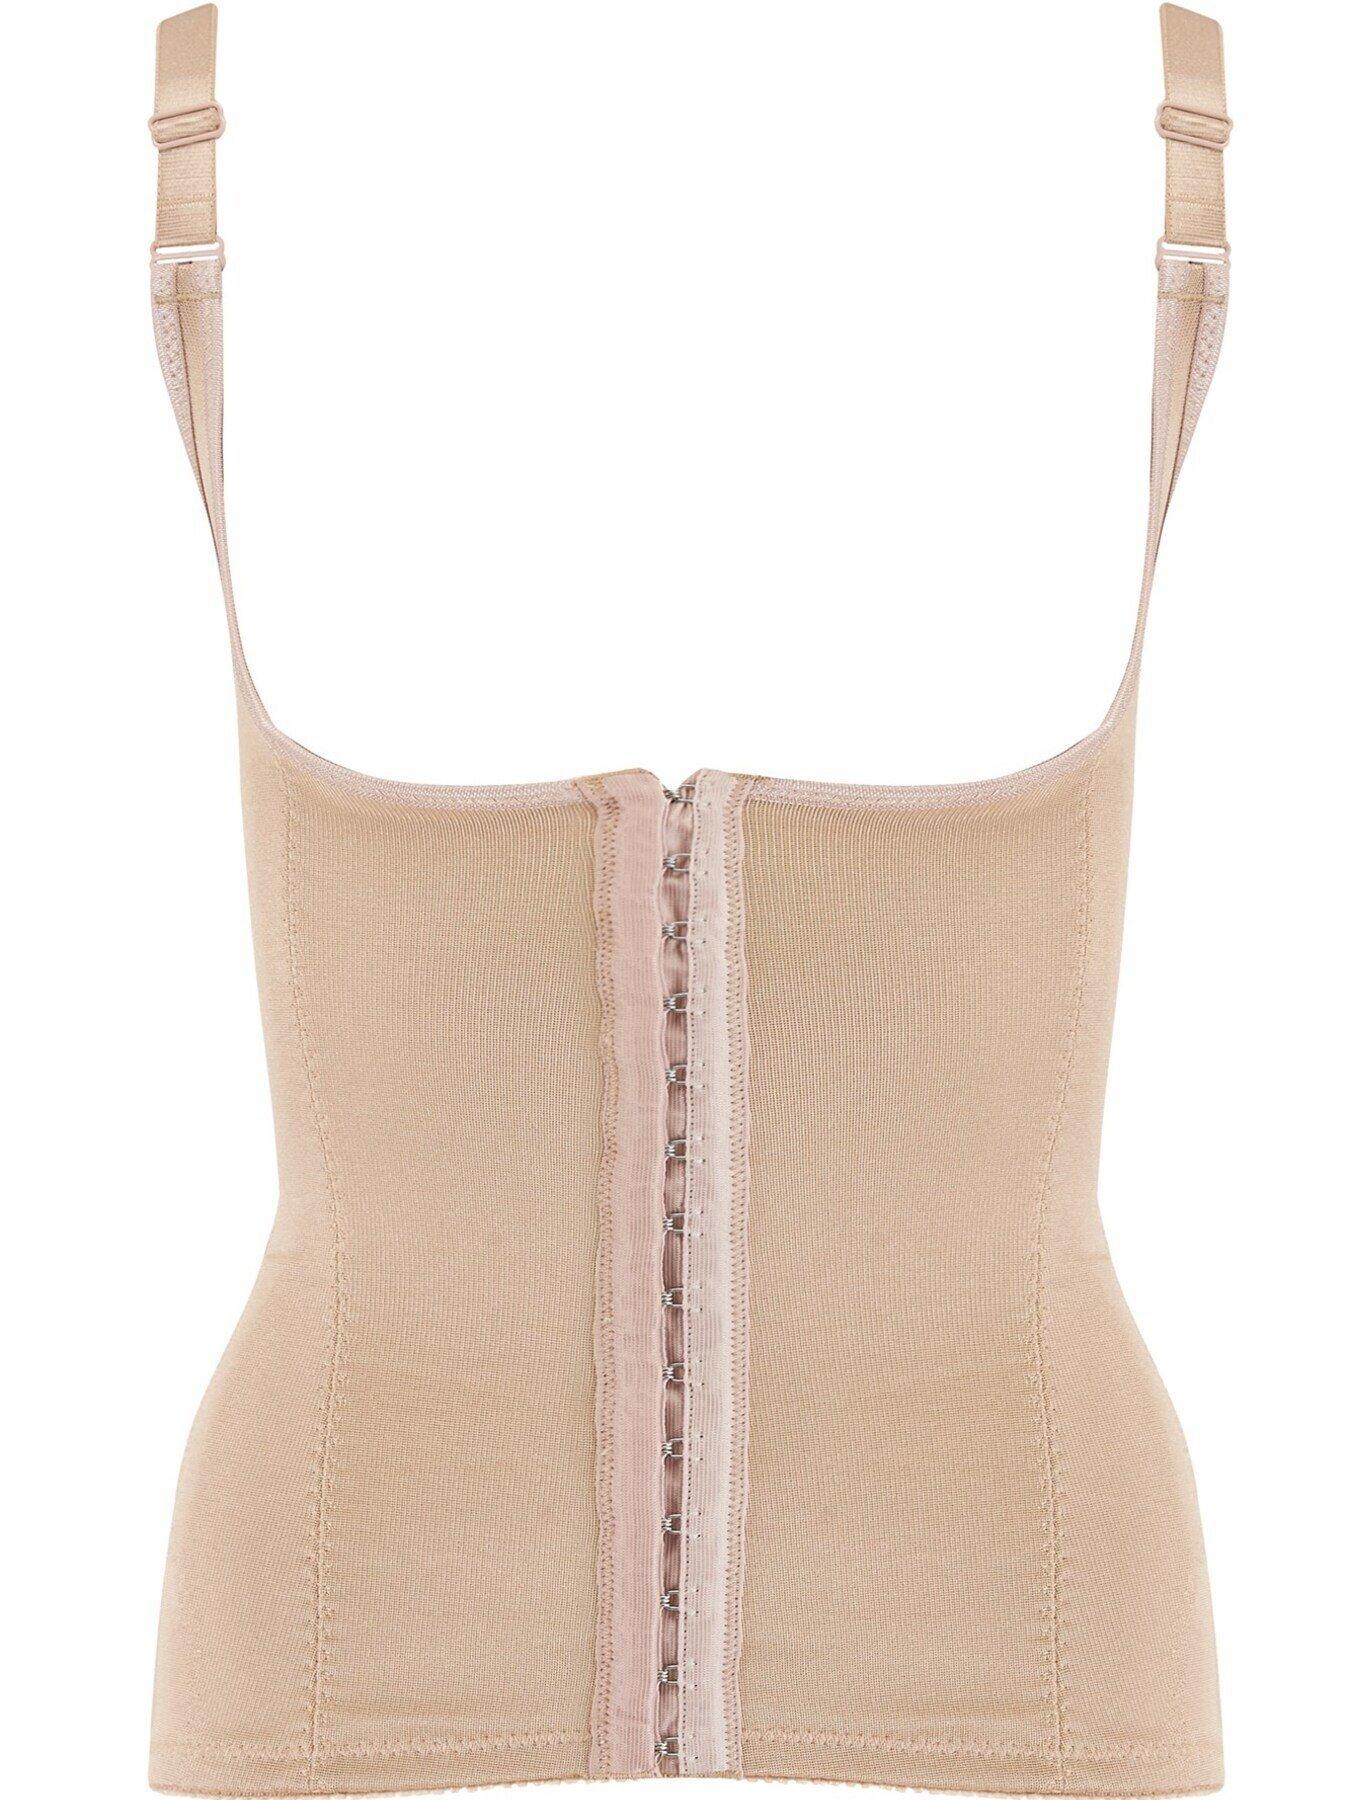 Pour Moi Hourglass Firm Control Thong - Nude